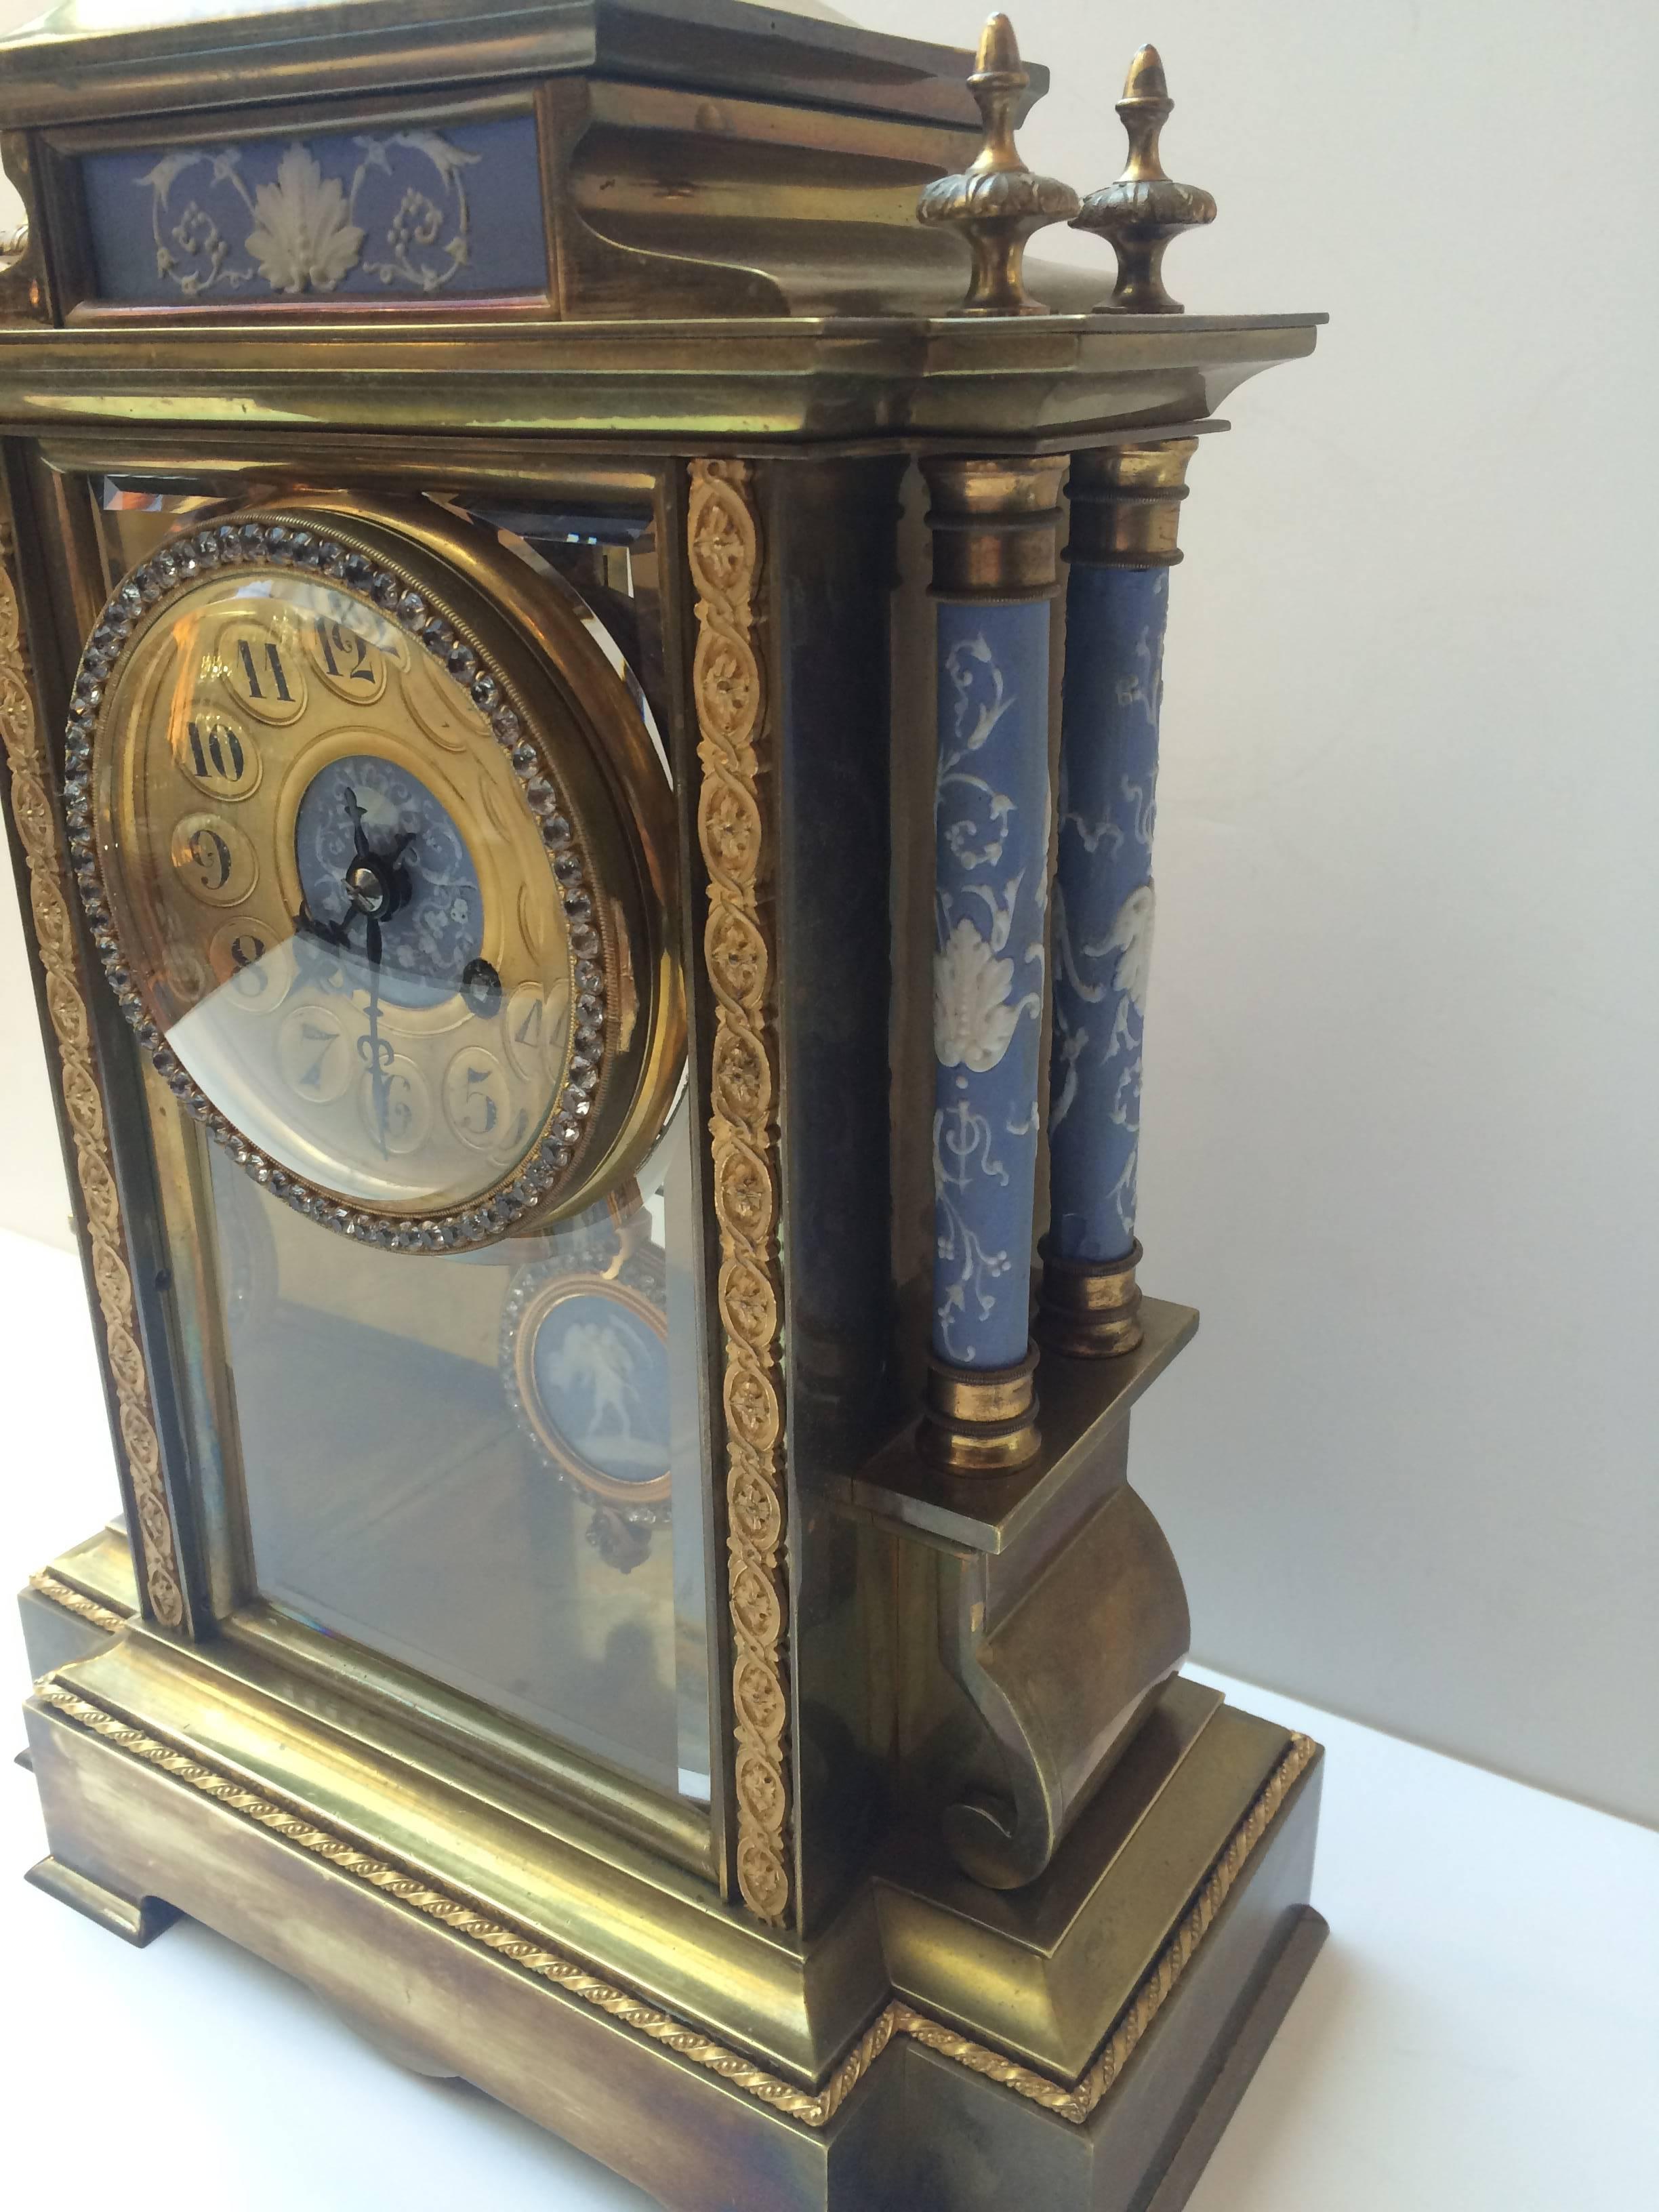 This is a 19th century neoclassical French mantel clock by Japy Freres, with the works, pendulum and chimes housed in a bronze and bevelled glass case.

The clock features decorative side columns, centre dial, pendulum and a rectangular plaque